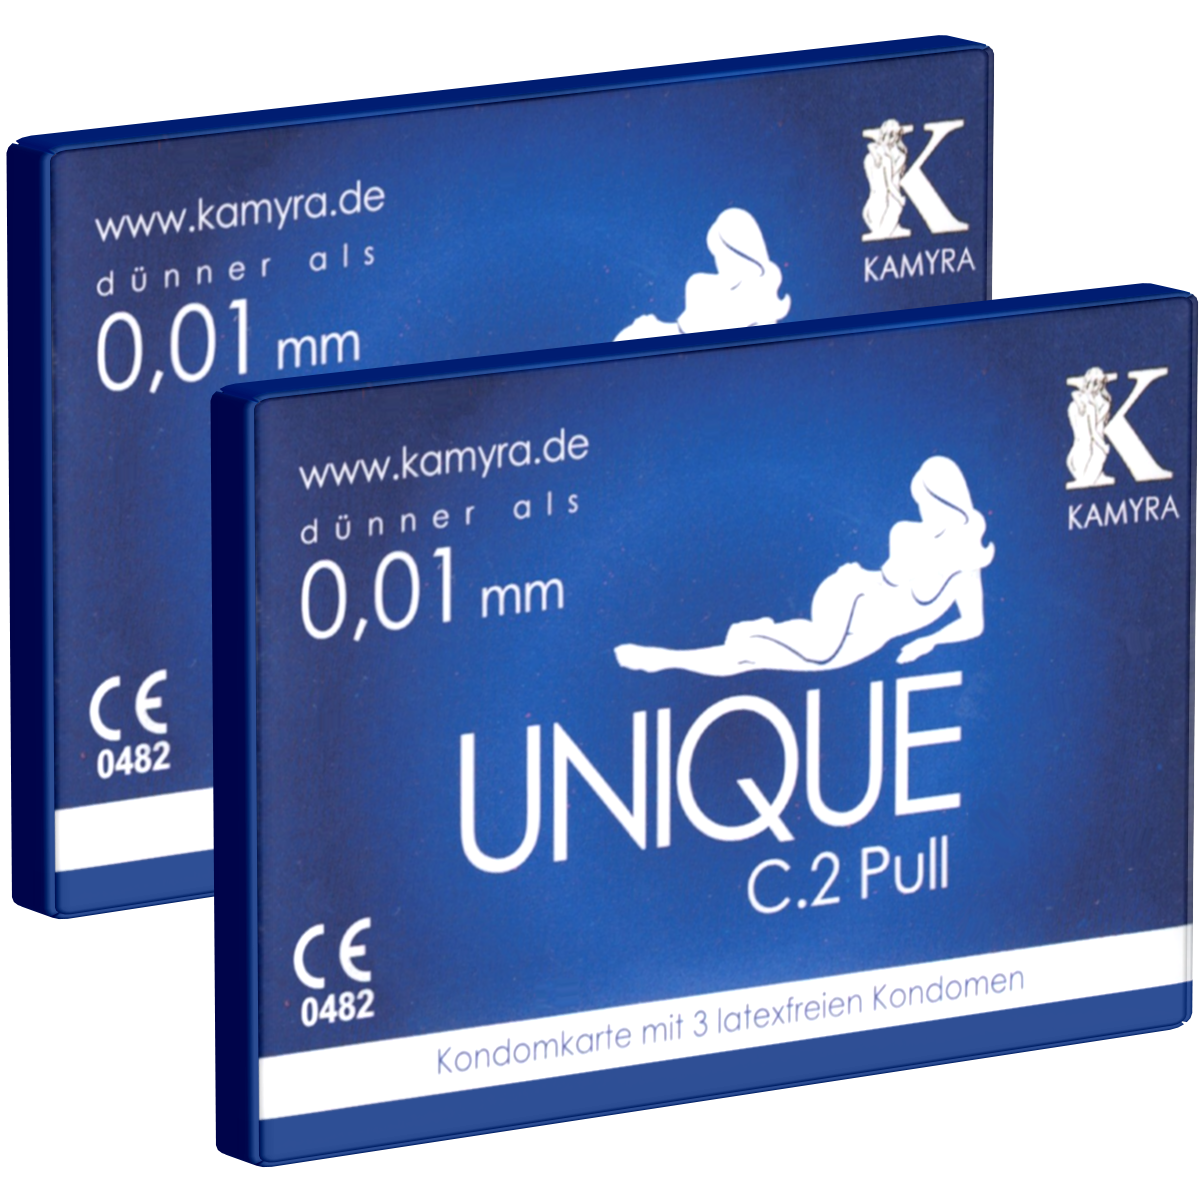 Kamyra «Unique C.2 Pull» double pack - 2 condom cards with in total 6 latex free condoms